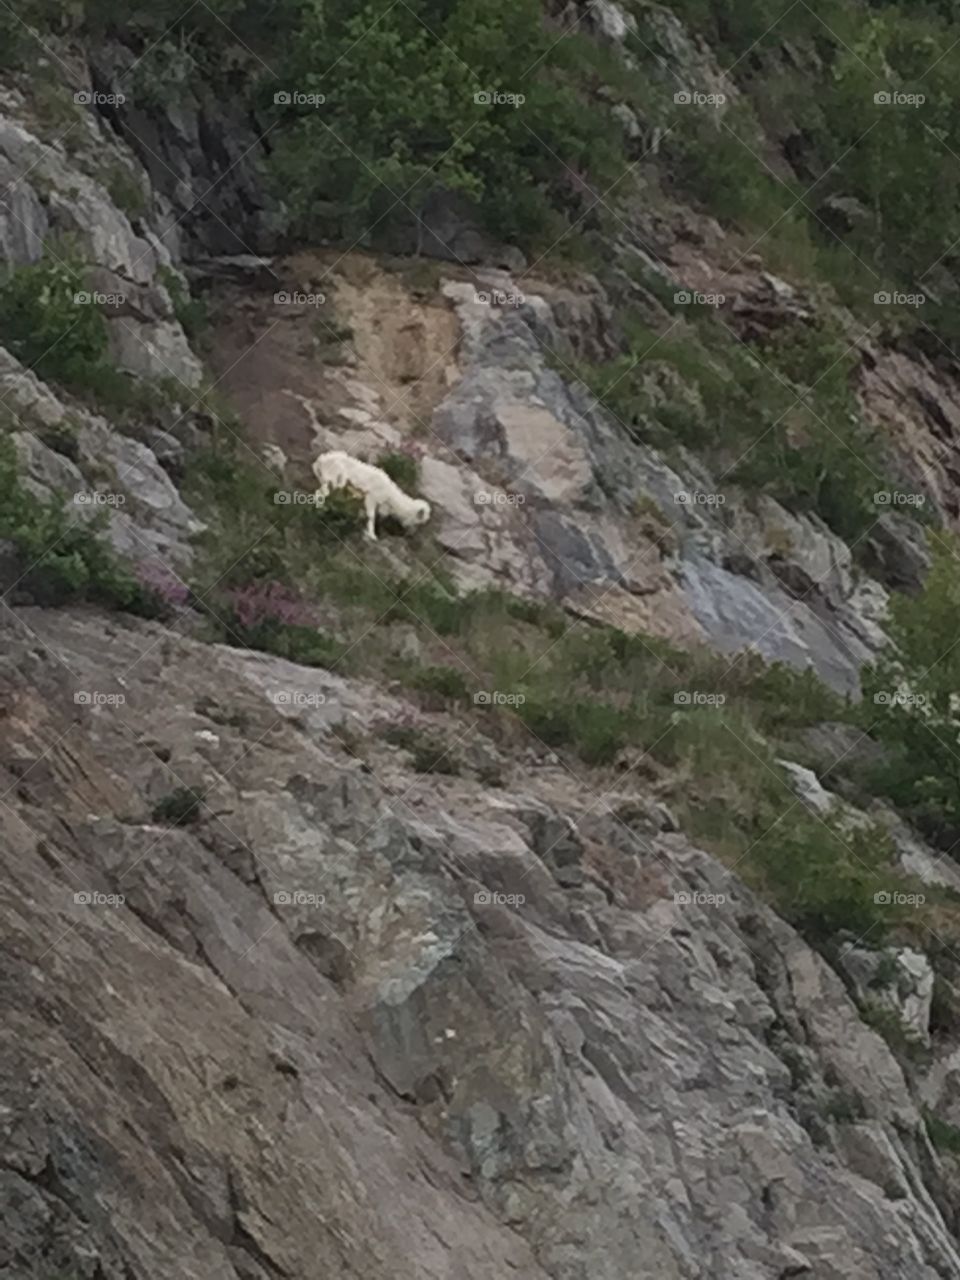 Sheep. This guy is eating on the Turnagain Arm outside Anchorage Alaska